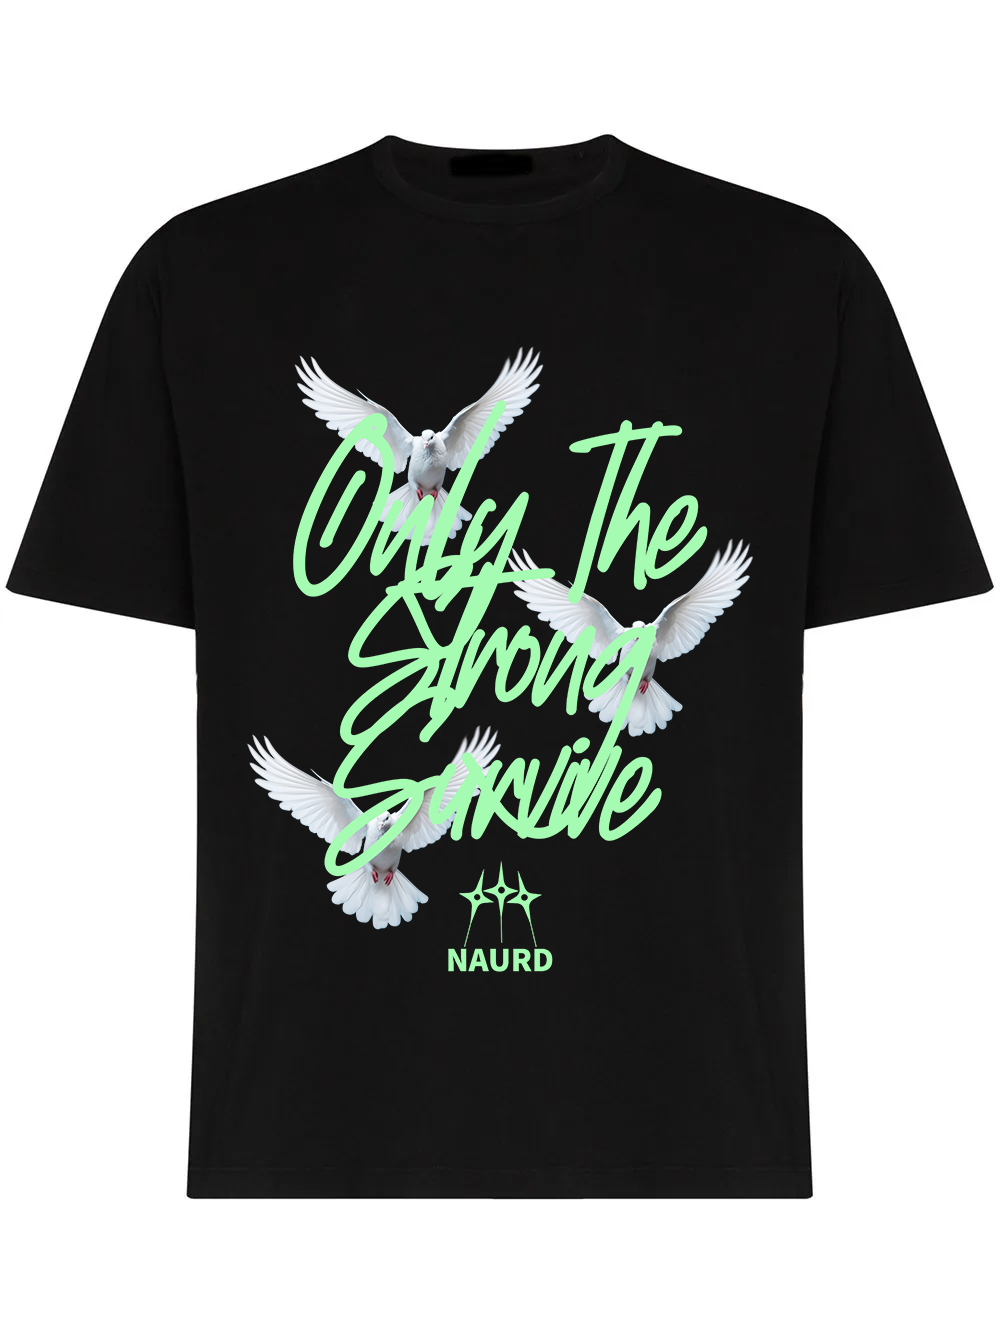 "Only The Strong Survive" Black Oversized graphic tee